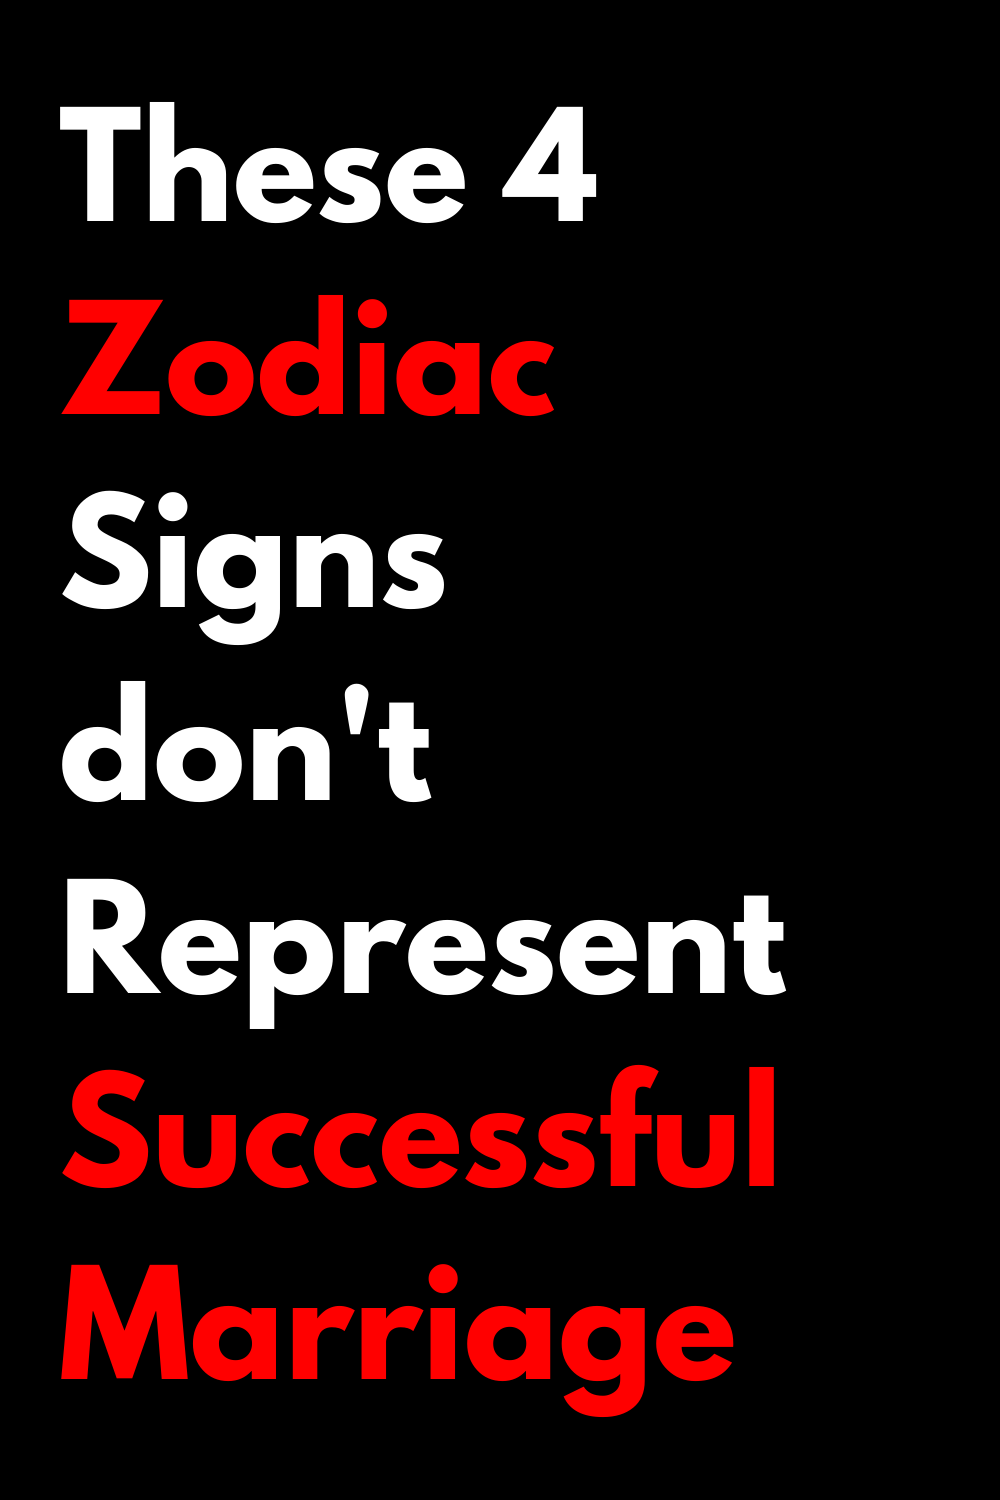 These 4 Zodiac Signs don't Represent Successful Marriage